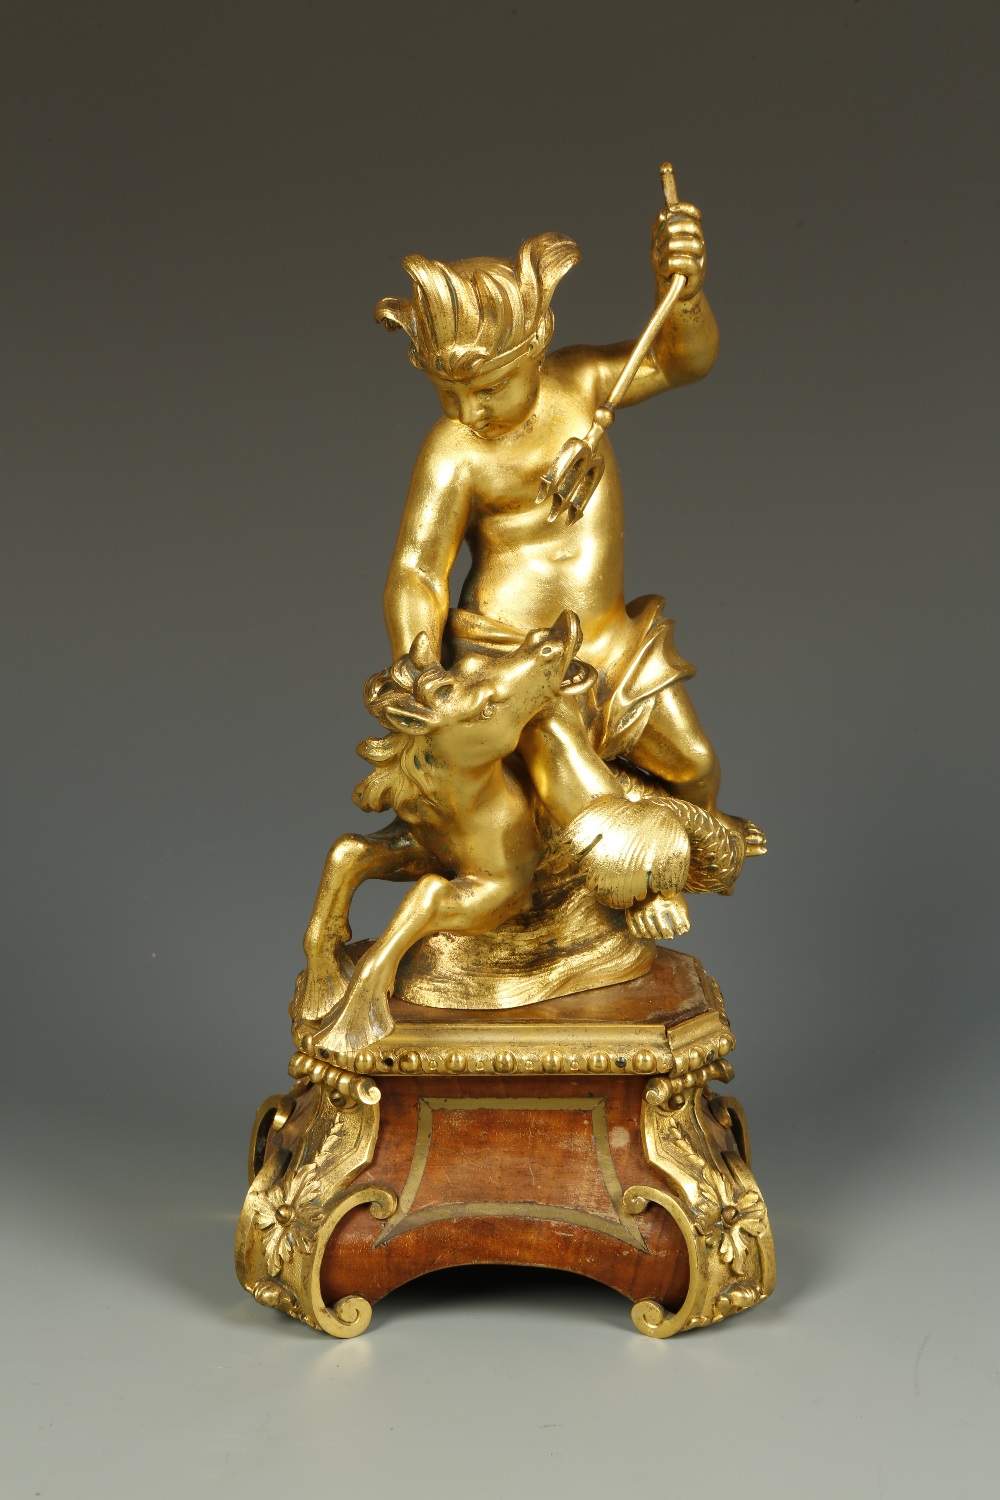 A GILT BRONZE OF A YOUTHFUL NEPTUNE with a trident aloft riding on the back of a hippocamp, on an